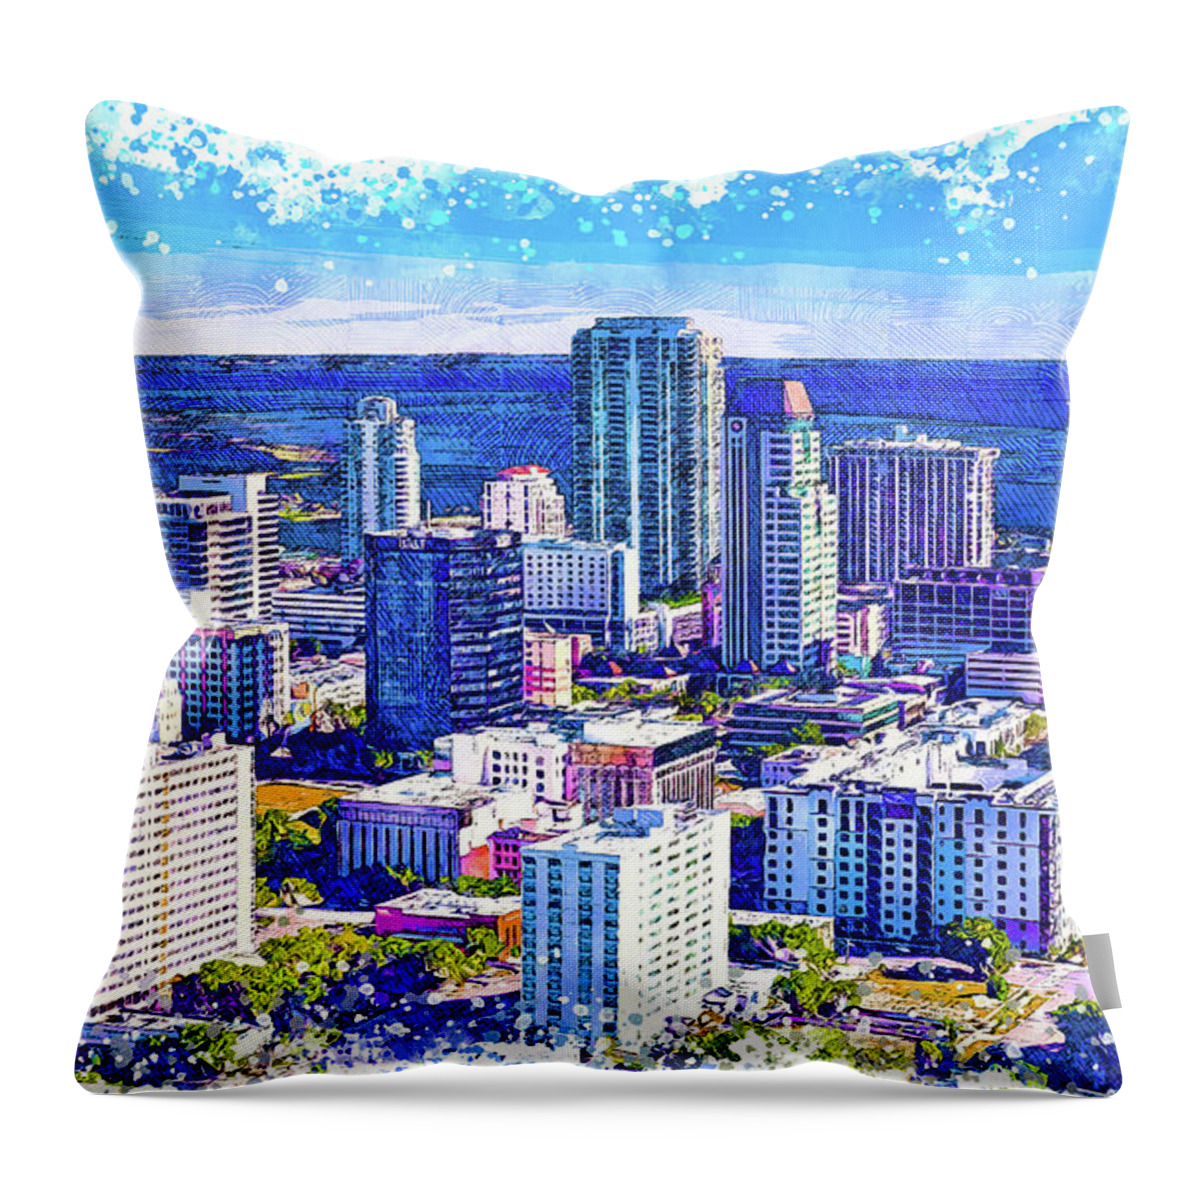 St. Petersburg Throw Pillow featuring the digital art Downtown St. Petersburg, Florida - sketch painting by Nicko Prints